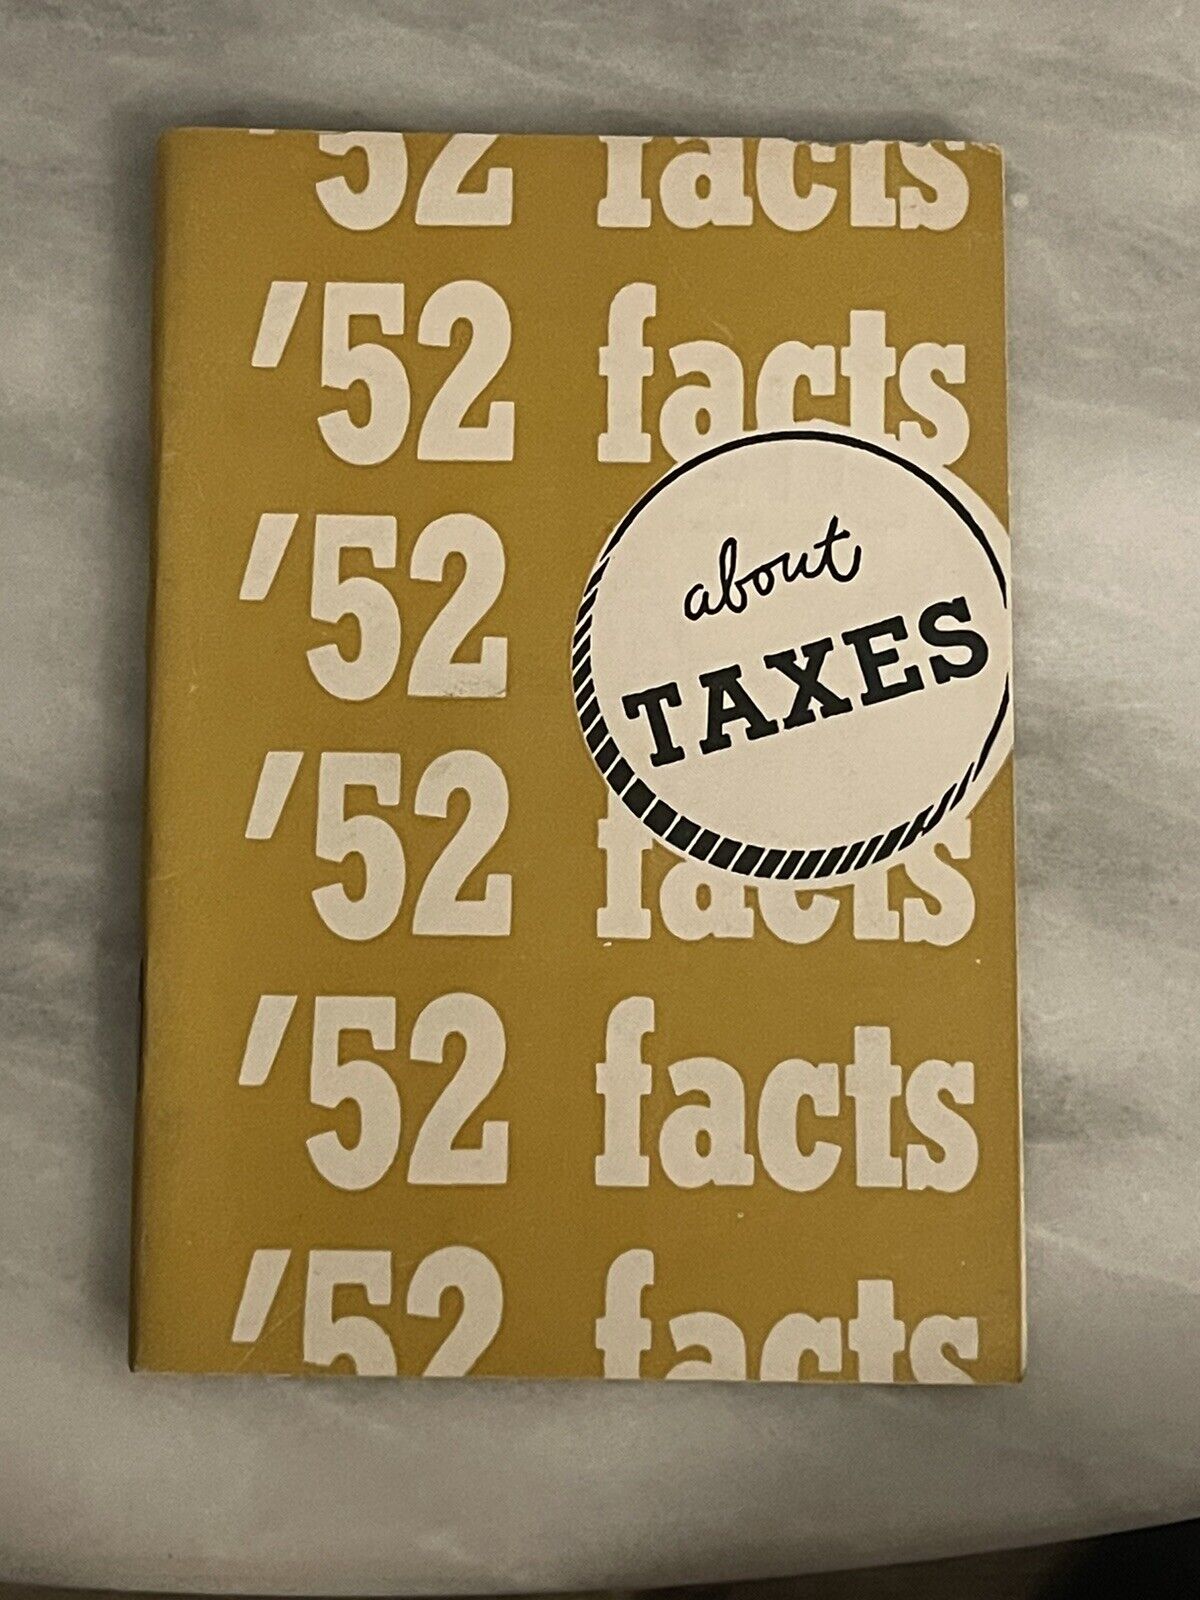 Rare 1952 ‘52 facts about TAXES #2 CIO PAC Political Action Commitee Booklet US